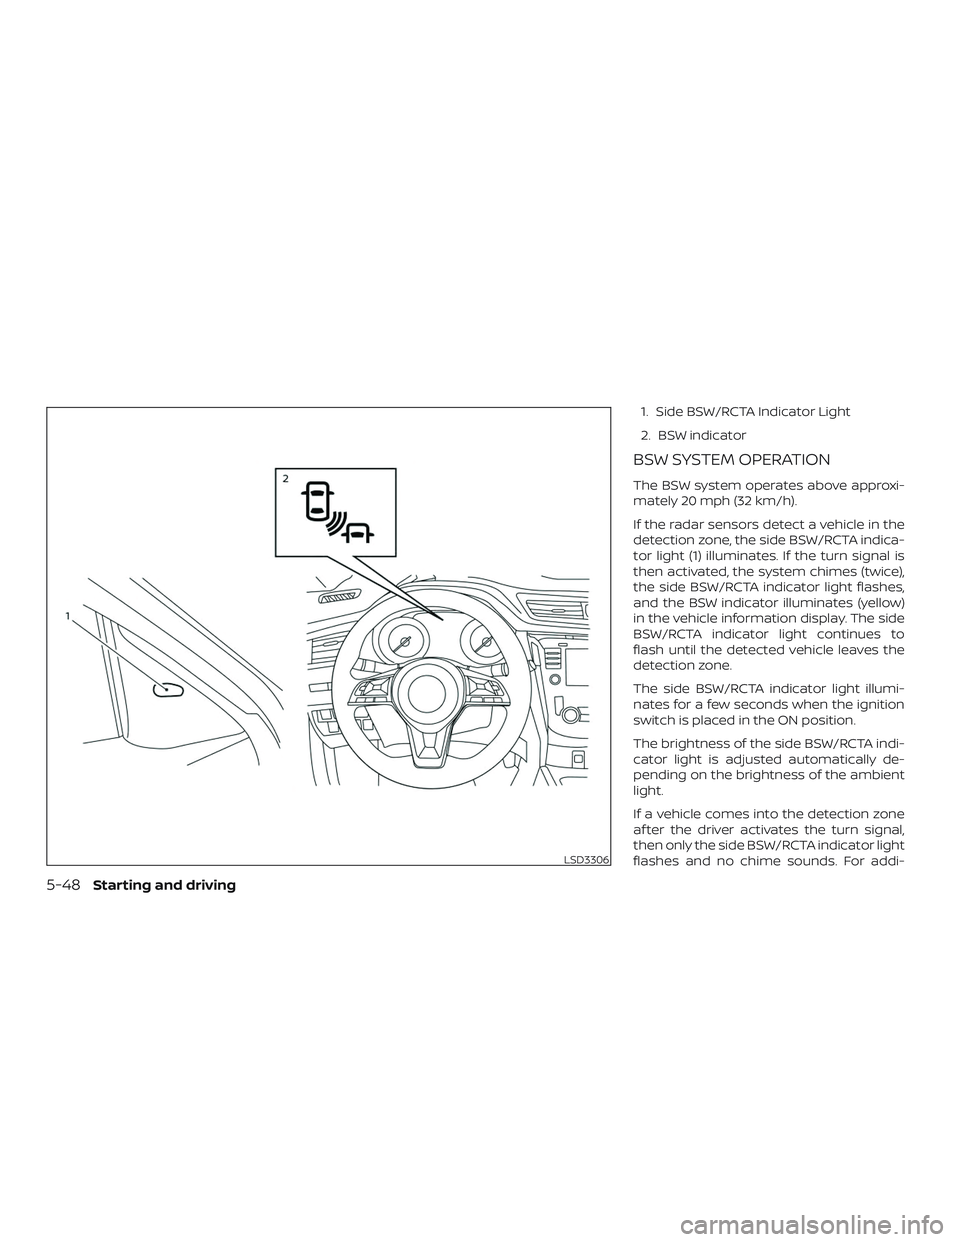 NISSAN ROGUE 2020  Owner´s Manual 1. Side BSW/RCTA Indicator Light
2. BSW indicator
BSW SYSTEM OPERATION
The BSW system operates above approxi-
mately 20 mph (32 km/h).
If the radar sensors detect a vehicle in the
detection zone, the 